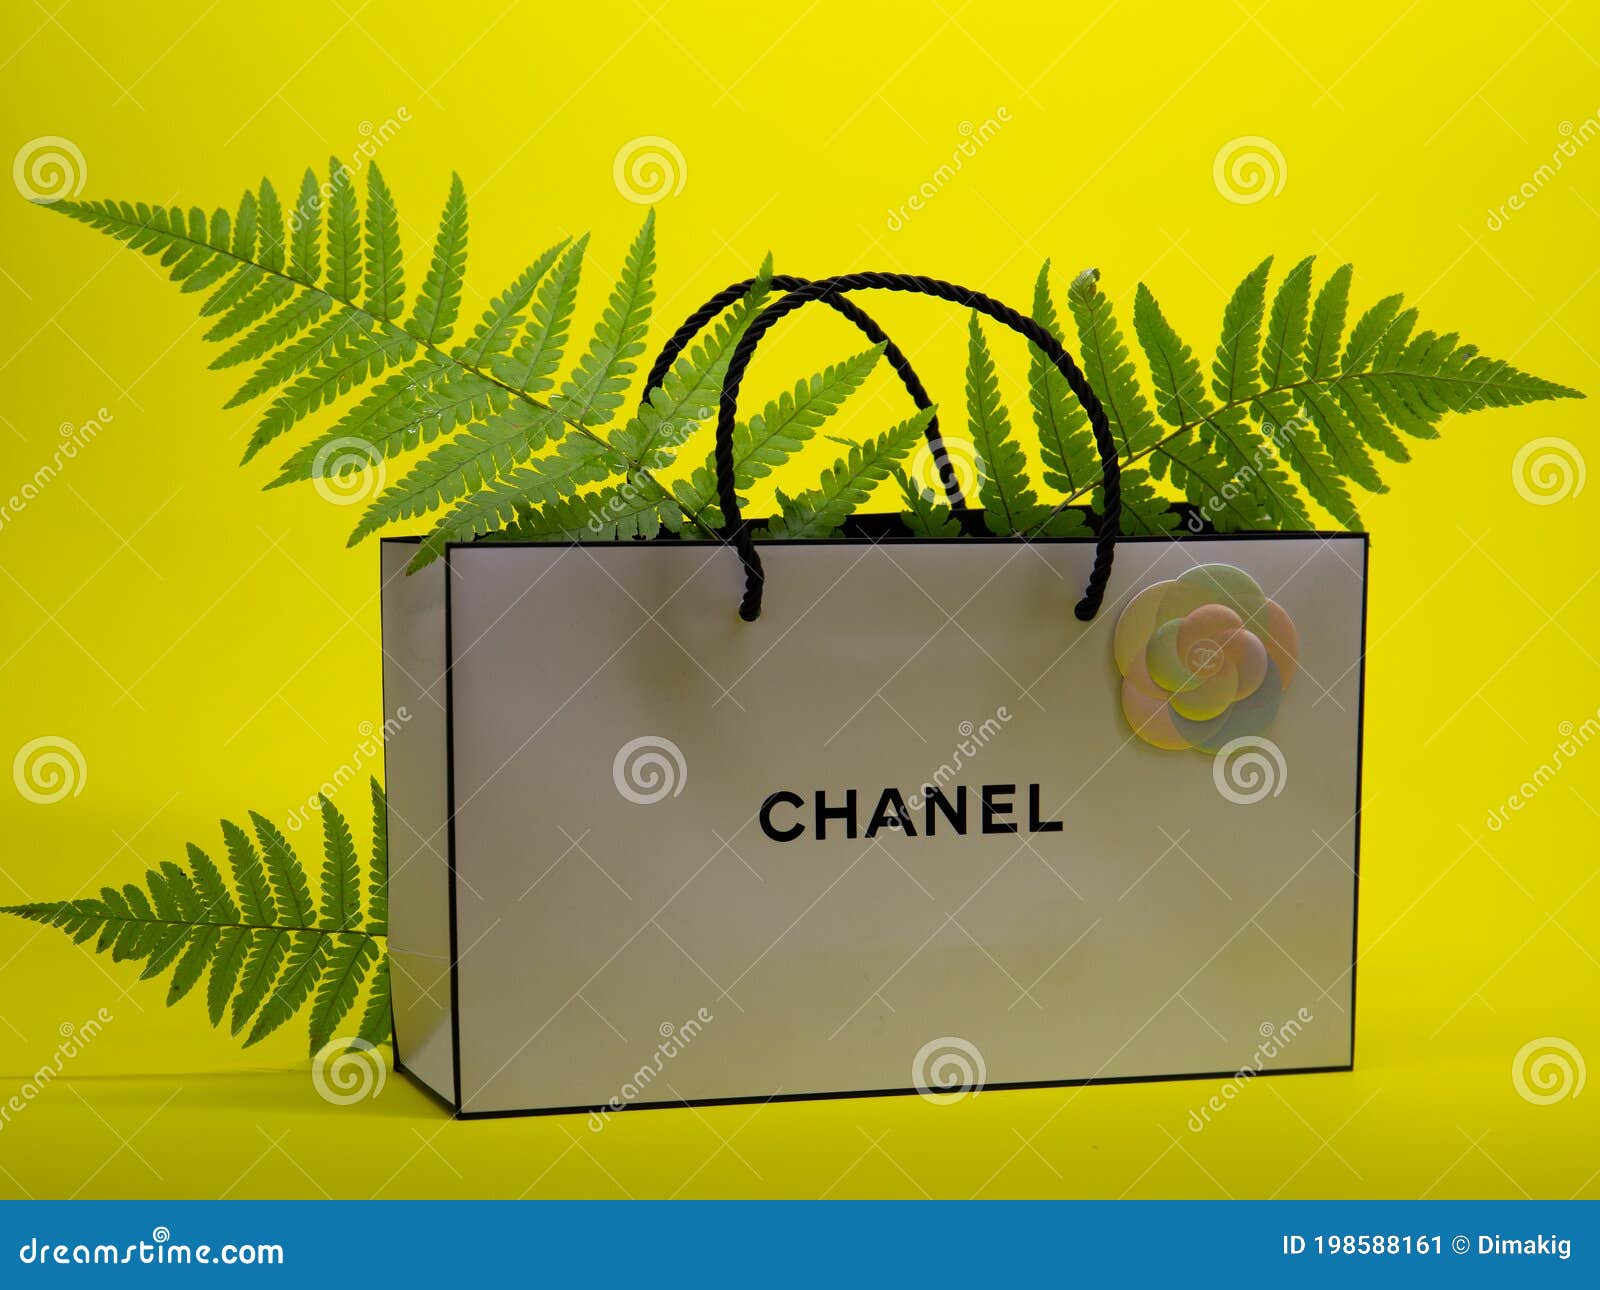 Premium Vector  A bag that is from the company chanel.